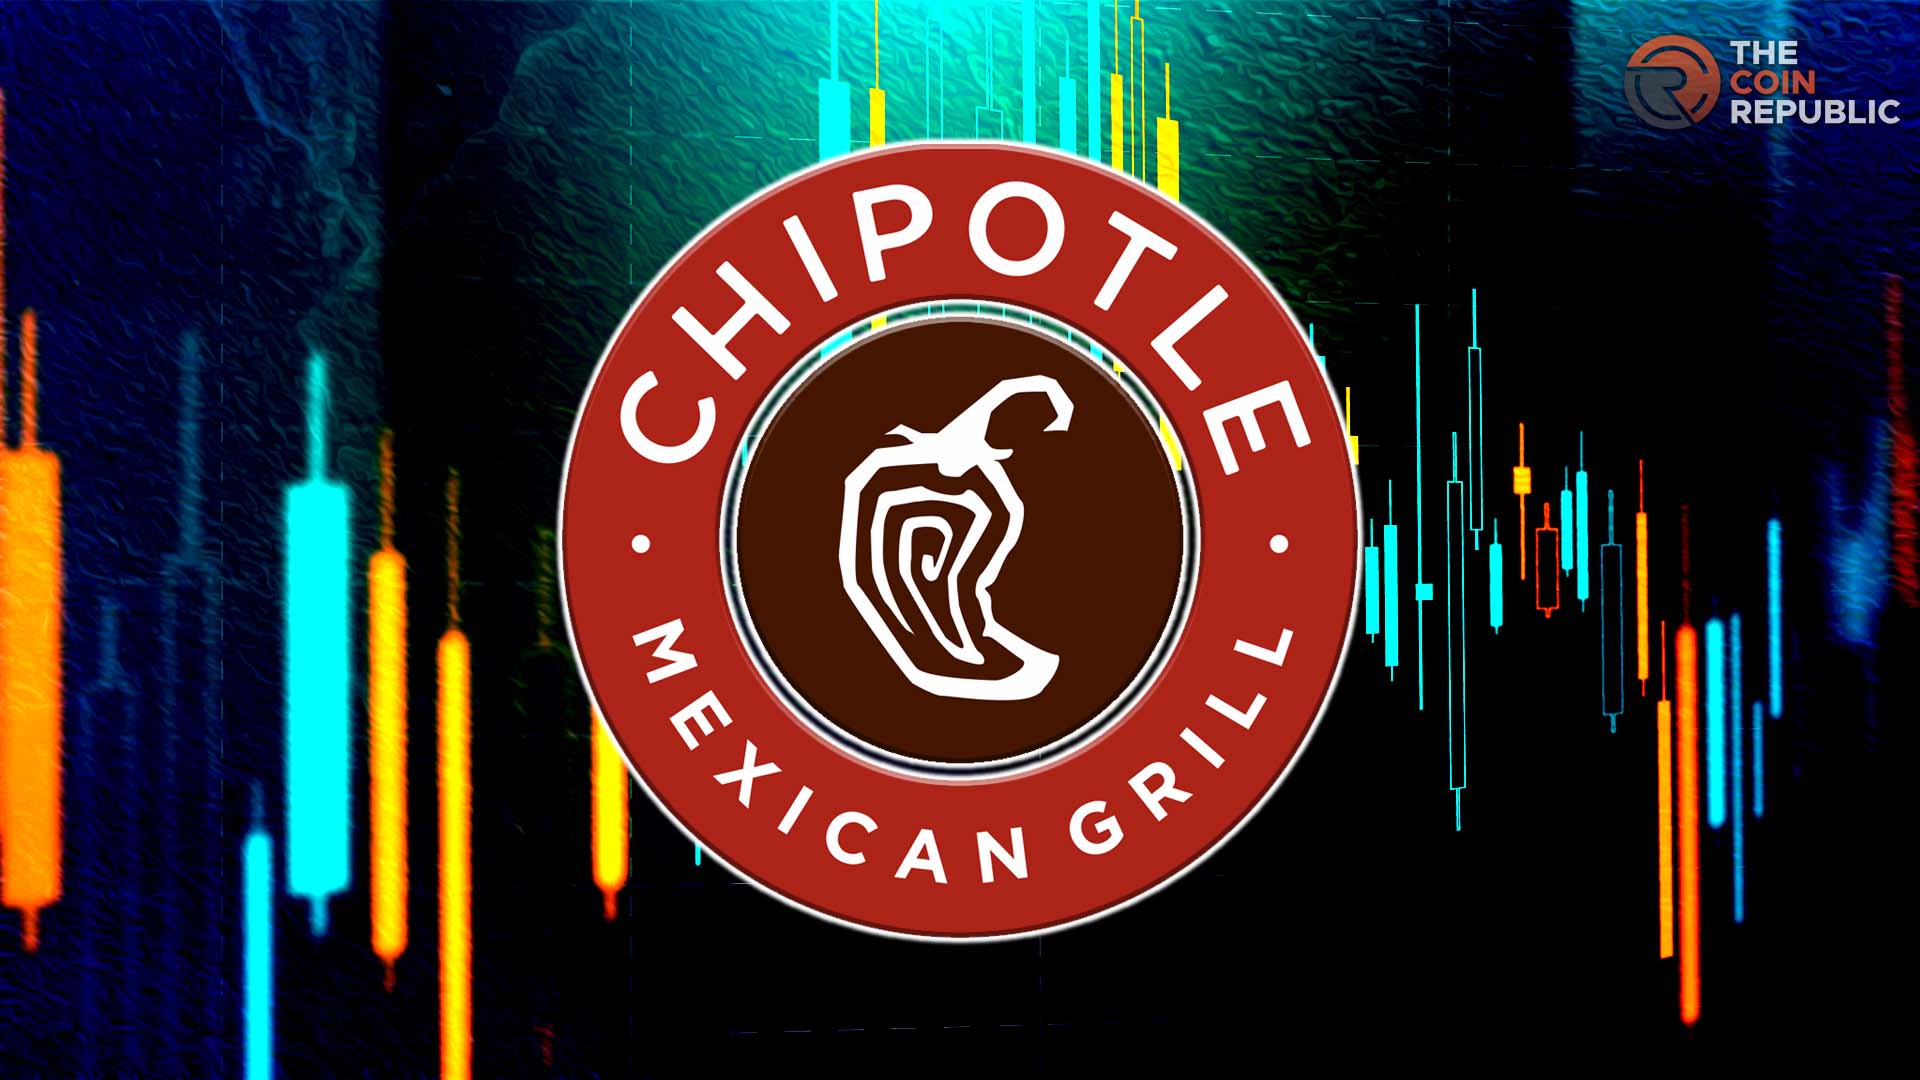 CMG Stock Price: Chipotle Mexican Grill Inc. Marks Massive Gap Up